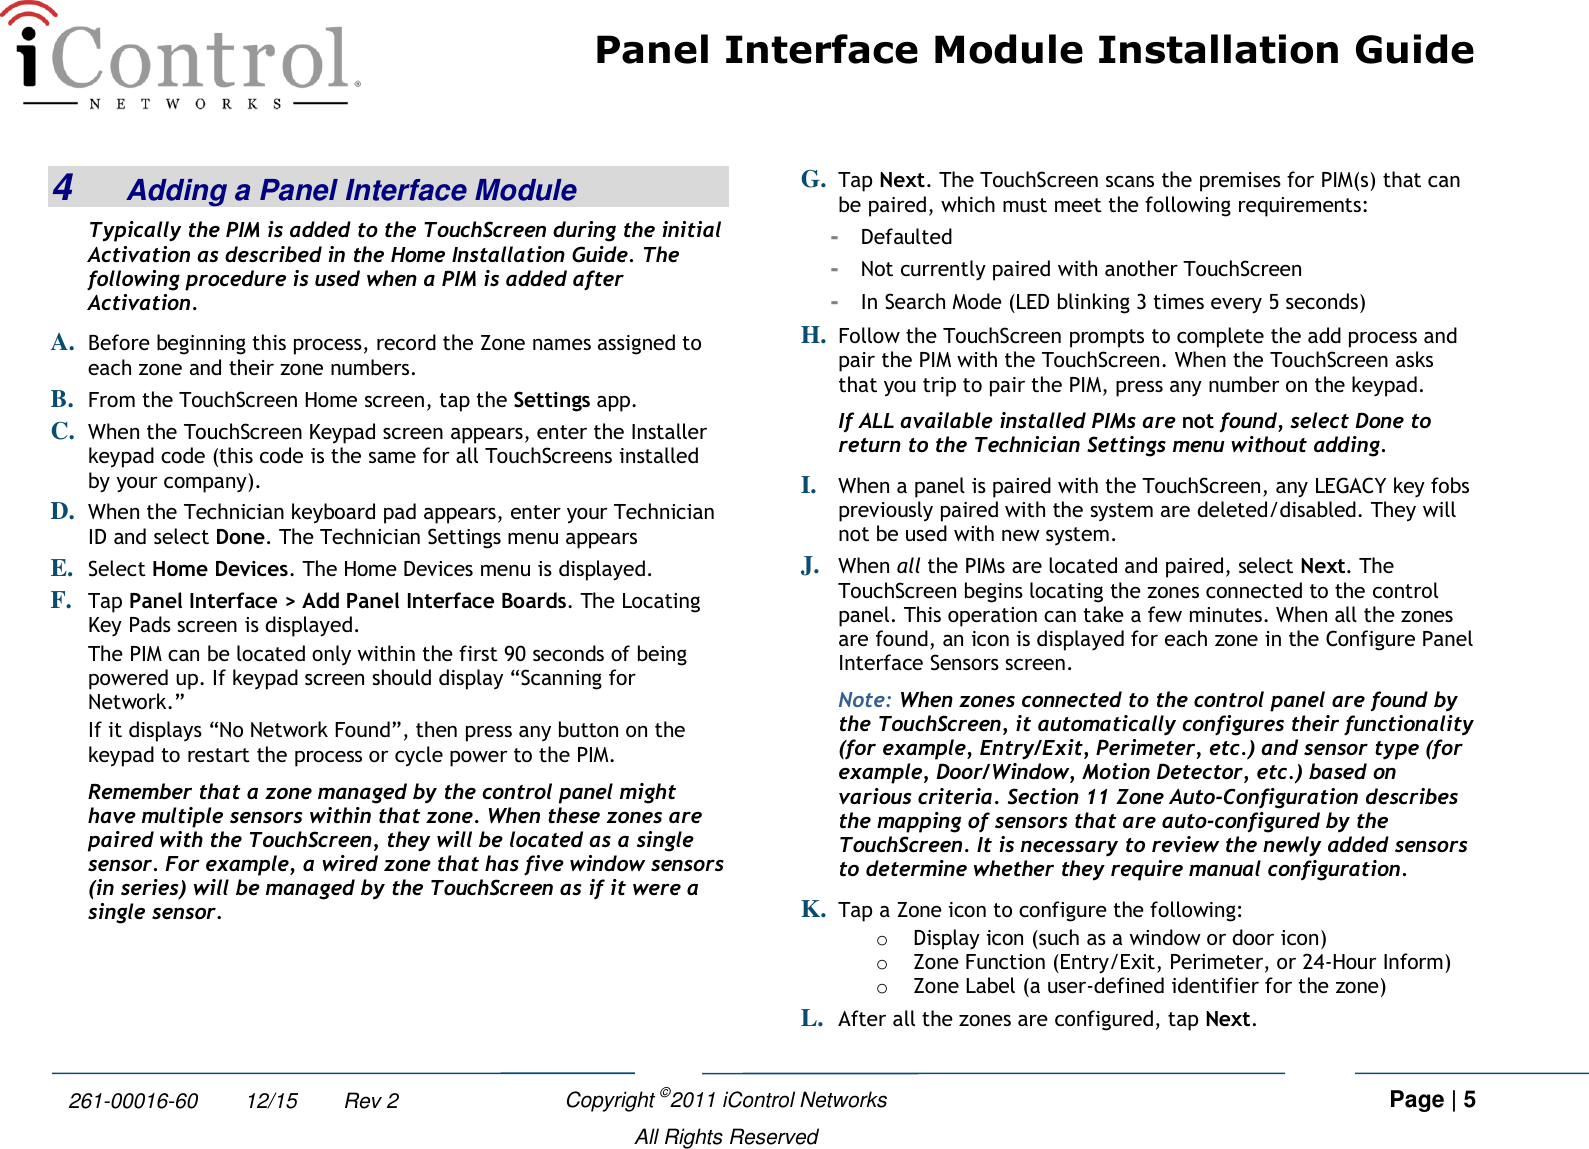 Panel Interface Module Installation Guide    Copyright ©2011 iControl Networks   Page | 5  All Rights Reserved 261-00016-60        12/15        Rev 2 4  Adding a Panel Interface Module Typically the PIM is added to the TouchScreen during the initial Activation as described in the Home Installation Guide. The following procedure is used when a PIM is added after Activation. A. Before beginning this process, record the Zone names assigned to each zone and their zone numbers. B. From the TouchScreen Home screen, tap the Settings app. C. When the TouchScreen Keypad screen appears, enter the Installer keypad code (this code is the same for all TouchScreens installed by your company). D. When the Technician keyboard pad appears, enter your Technician ID and select Done. The Technician Settings menu appears E. Select Home Devices. The Home Devices menu is displayed. F. Tap Panel Interface &gt; Add Panel Interface Boards. The Locating Key Pads screen is displayed. The PIM can be located only within the first 90 seconds of being powered up. If keypad screen should display “Scanning for Network.”  If it displays “No Network Found”, then press any button on the keypad to restart the process or cycle power to the PIM.  Remember that a zone managed by the control panel might have multiple sensors within that zone. When these zones are paired with the TouchScreen, they will be located as a single sensor. For example, a wired zone that has five window sensors (in series) will be managed by the TouchScreen as if it were a single sensor.  G. Tap Next. The TouchScreen scans the premises for PIM(s) that can be paired, which must meet the following requirements: -  Defaulted -  Not currently paired with another TouchScreen -  In Search Mode (LED blinking 3 times every 5 seconds) H. Follow the TouchScreen prompts to complete the add process and pair the PIM with the TouchScreen. When the TouchScreen asks that you trip to pair the PIM, press any number on the keypad. If ALL available installed PIMs are not found, select Done to return to the Technician Settings menu without adding. I. When a panel is paired with the TouchScreen, any LEGACY key fobs previously paired with the system are deleted/disabled. They will not be used with new system.  J. When all the PIMs are located and paired, select Next. The TouchScreen begins locating the zones connected to the control panel. This operation can take a few minutes. When all the zones are found, an icon is displayed for each zone in the Configure Panel Interface Sensors screen. Note: When zones connected to the control panel are found by the TouchScreen, it automatically configures their functionality (for example, Entry/Exit, Perimeter, etc.) and sensor type (for example, Door/Window, Motion Detector, etc.) based on various criteria. Section 11 Zone Auto-Configuration describes the mapping of sensors that are auto-configured by the TouchScreen. It is necessary to review the newly added sensors to determine whether they require manual configuration. K. Tap a Zone icon to configure the following: o Display icon (such as a window or door icon) o Zone Function (Entry/Exit, Perimeter, or 24-Hour Inform) o Zone Label (a user-defined identifier for the zone) L. After all the zones are configured, tap Next.  